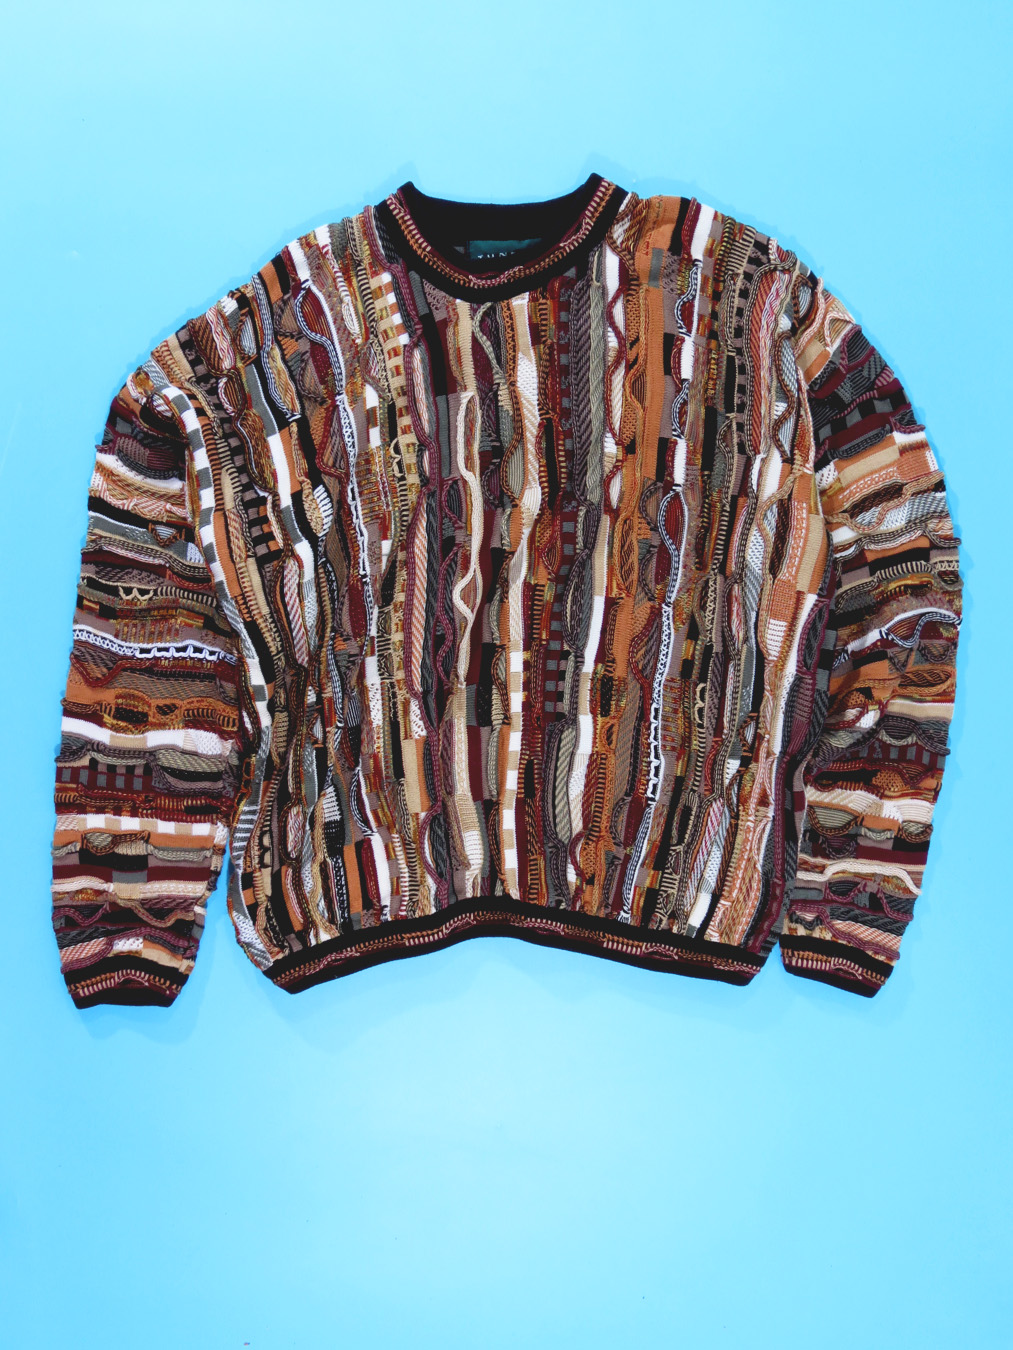 90s Coogi Style Knitted Tundra Sweater - 5 Star Vintage